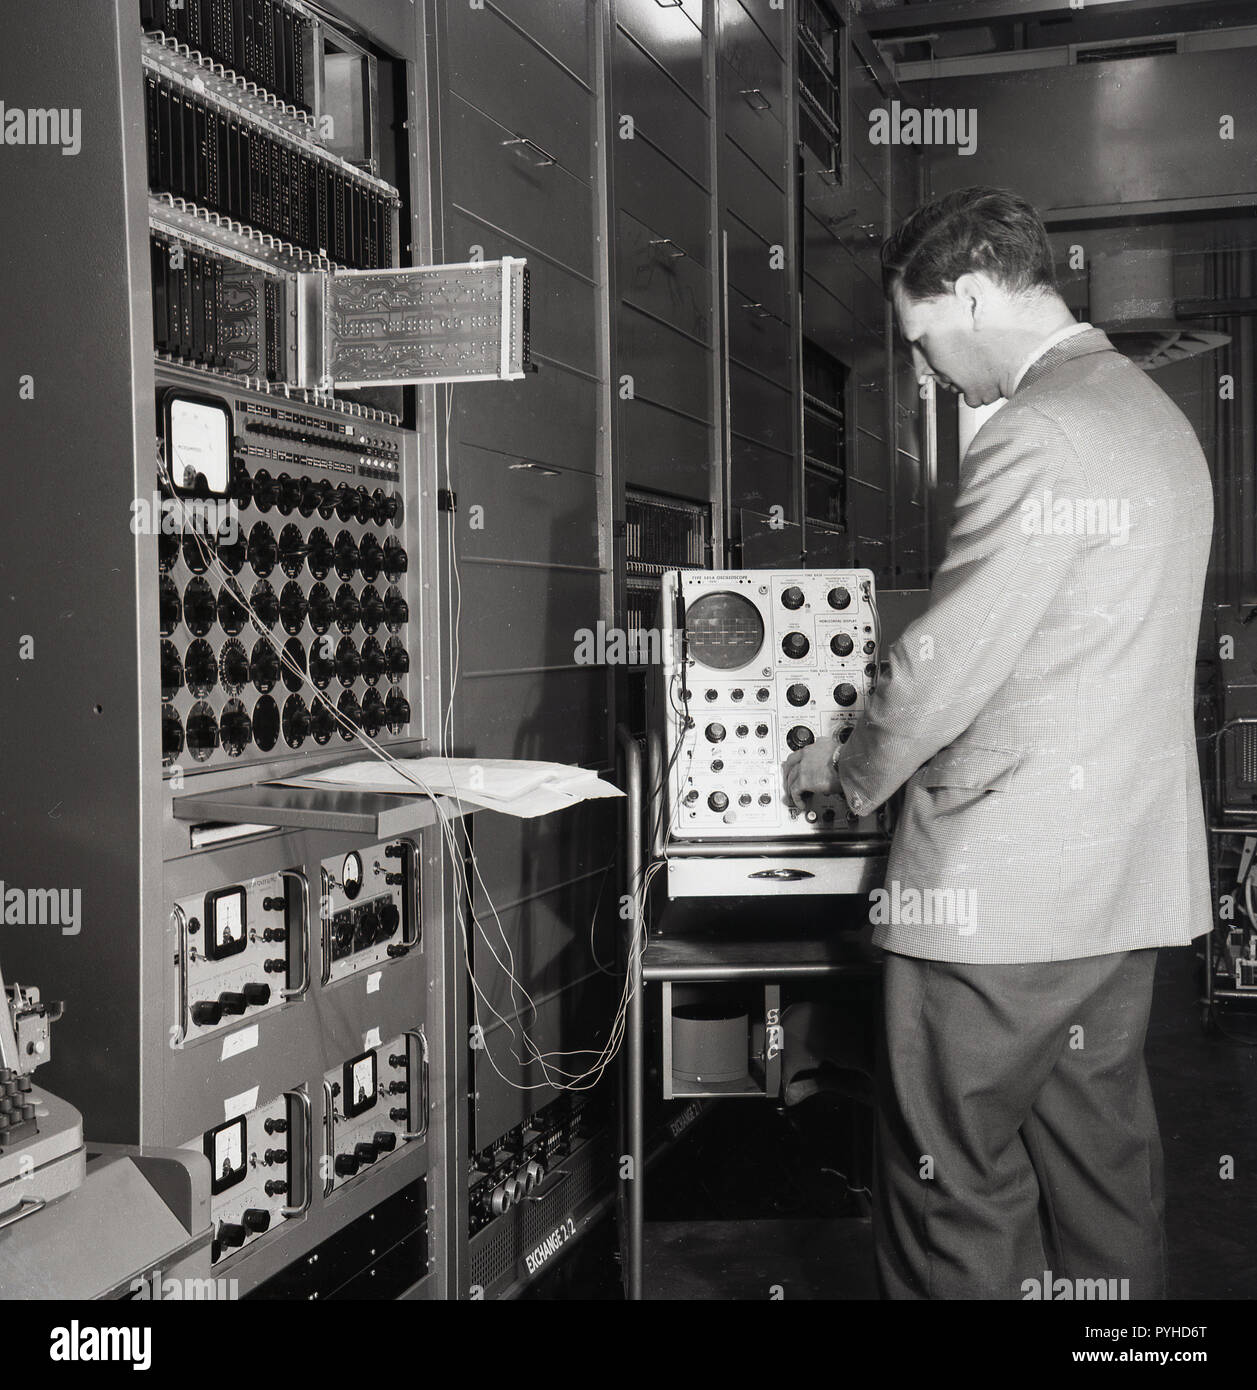 1960s, historical, a male technician working with stacks of broadcast equipment, including electronic oscillators. Stock Photo